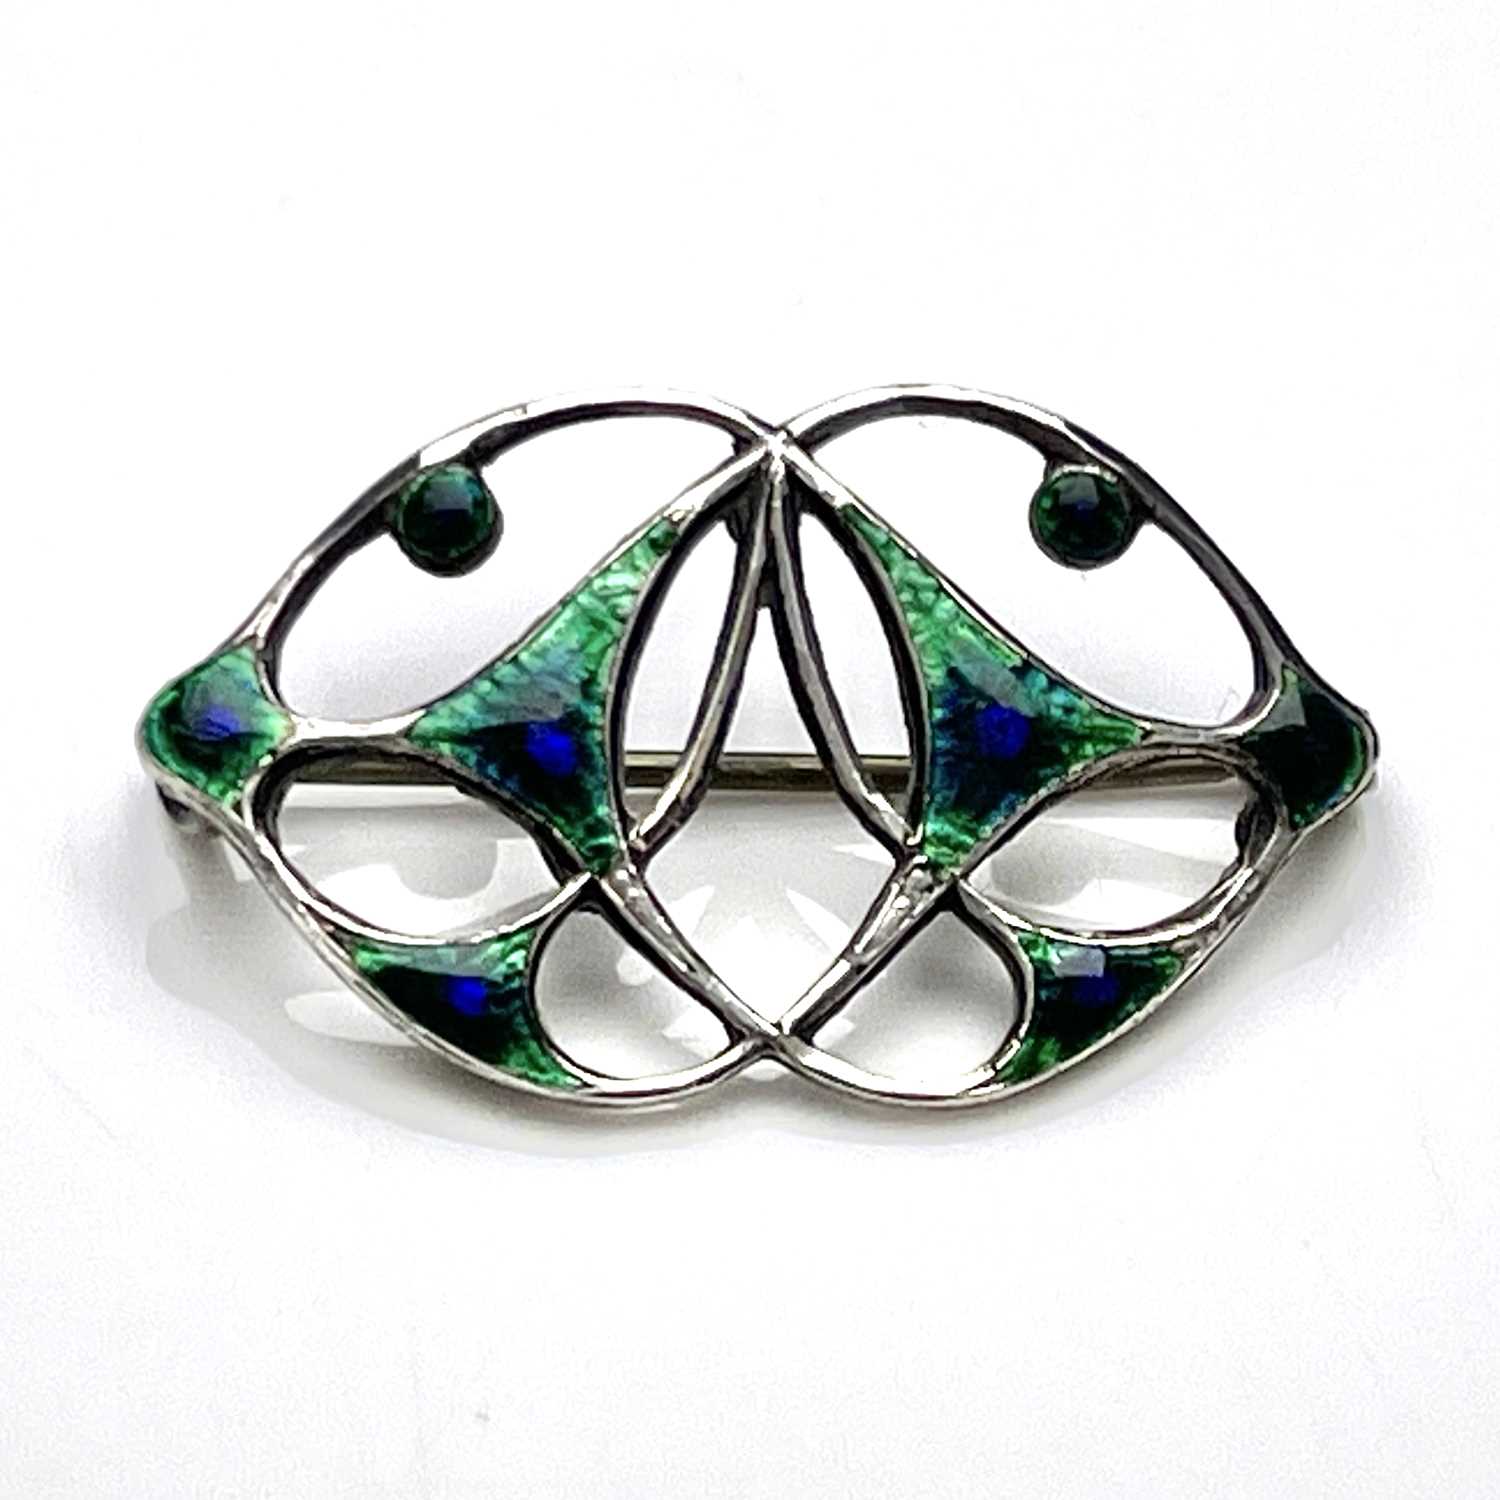 Charles Horner, an Arts and Crafts silver and enamelled brooch, Chester 1903, or symmetrical open